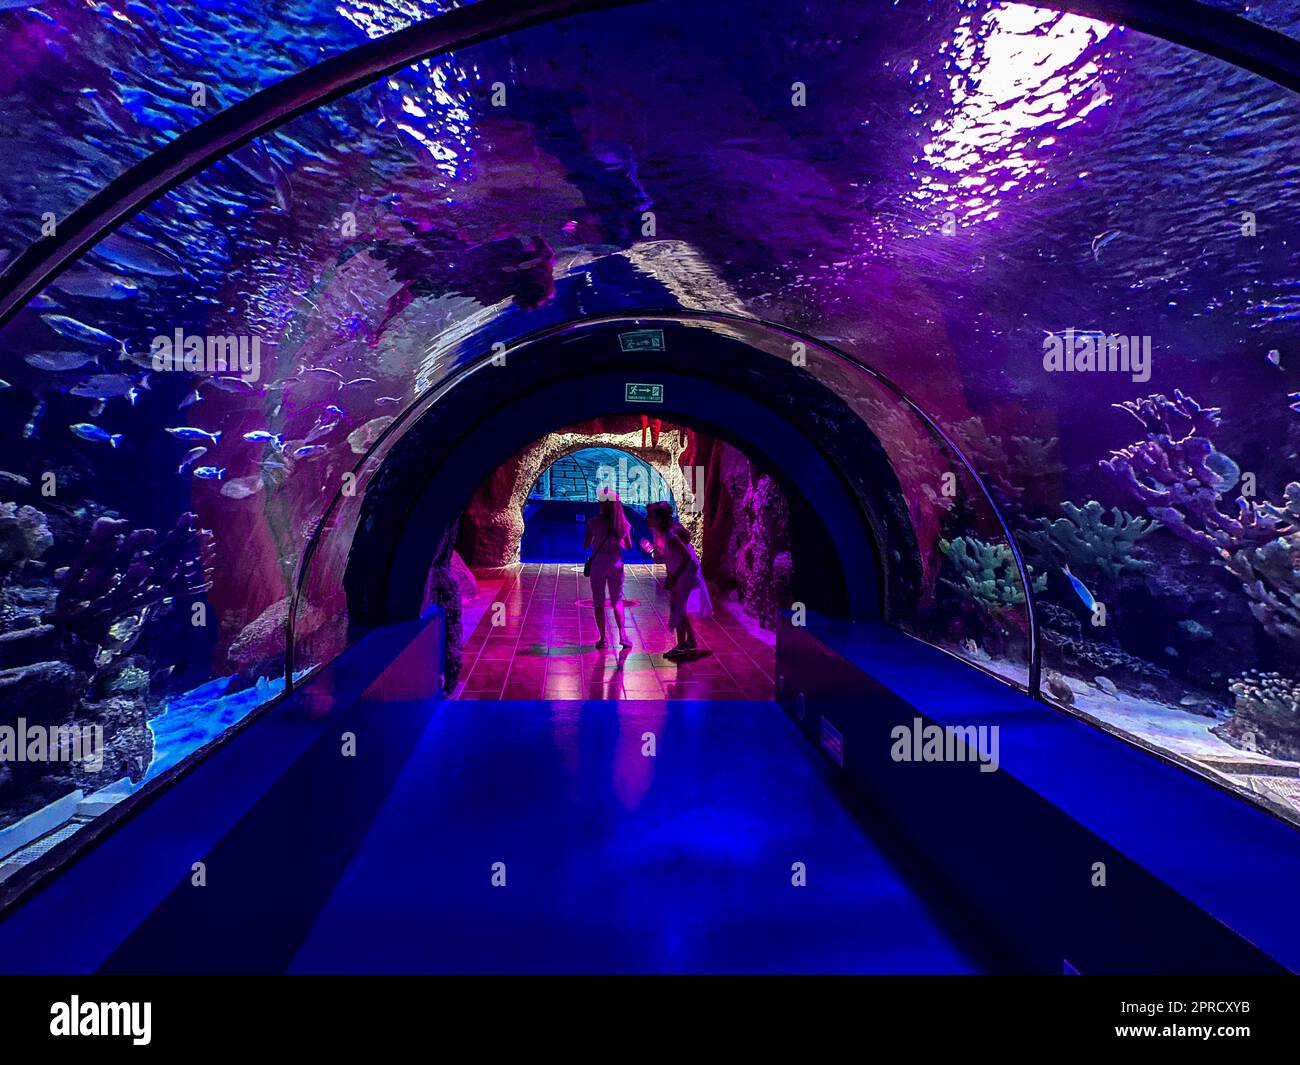 observation of the life of fish in the aquarium. tunnel with underwater world for tourists. people watch fish, plants in the aquarium. Stock Photo